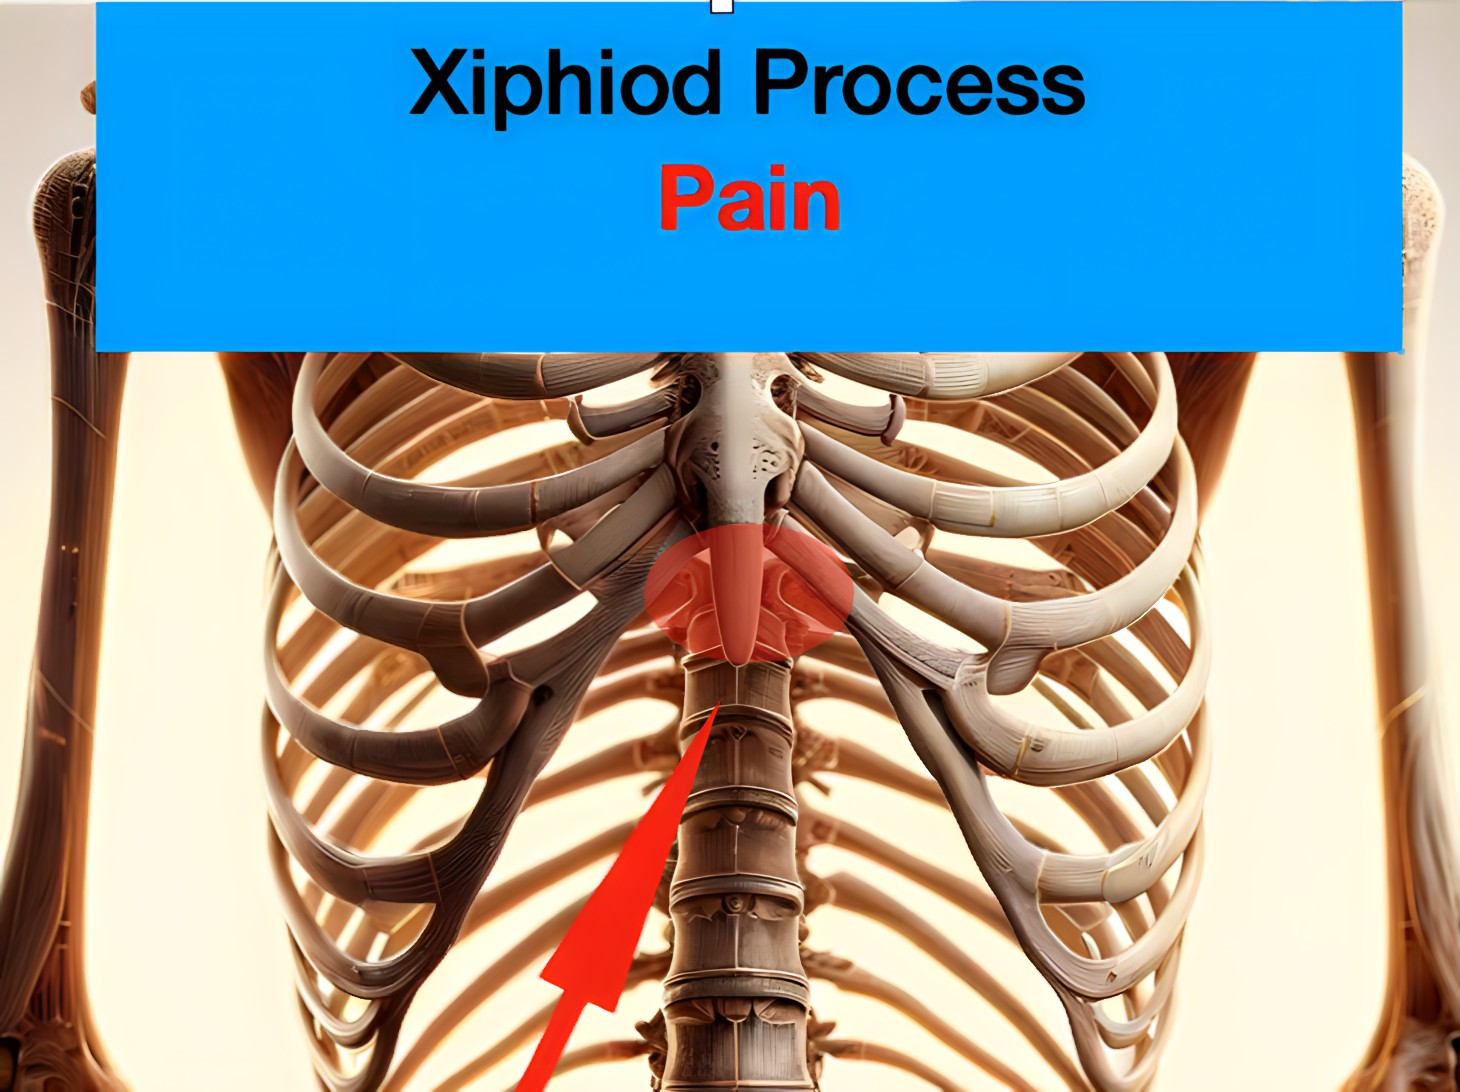 Xiphoid Process Pain: Relieve Chest Pain with Xiphoid Process Relief!